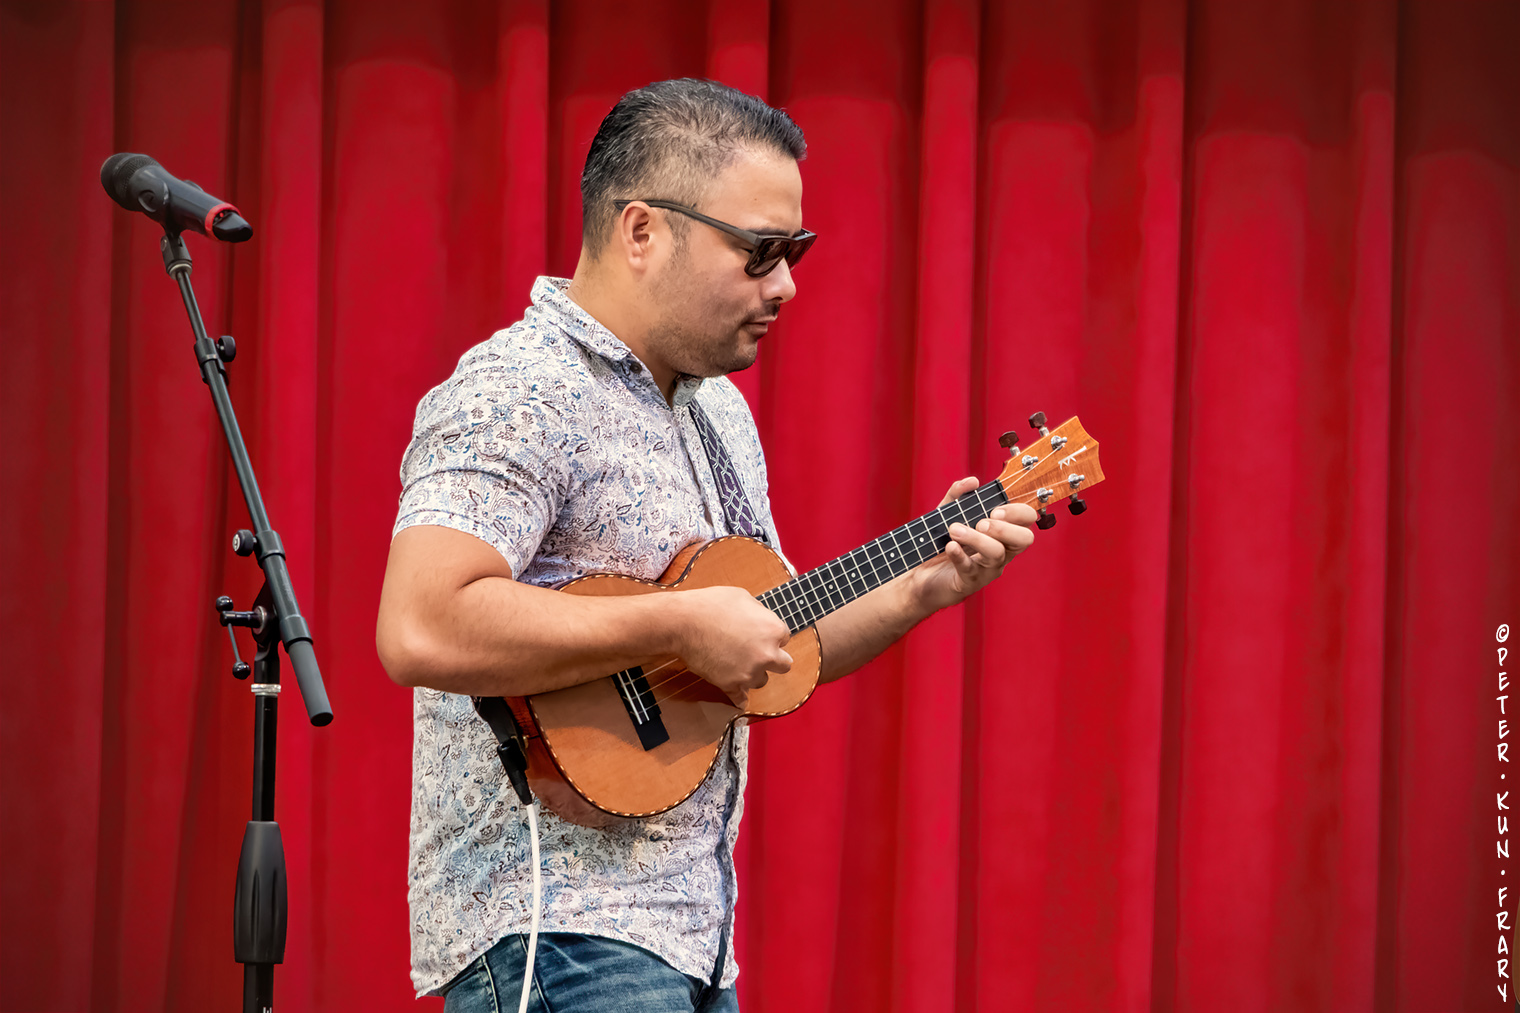 'Ukulele | The 'ukulele, played by Kalei Gamiao, is a plucked string chordophone closely related to the guitar and Portuguese braguinha | Peter Kun Frary